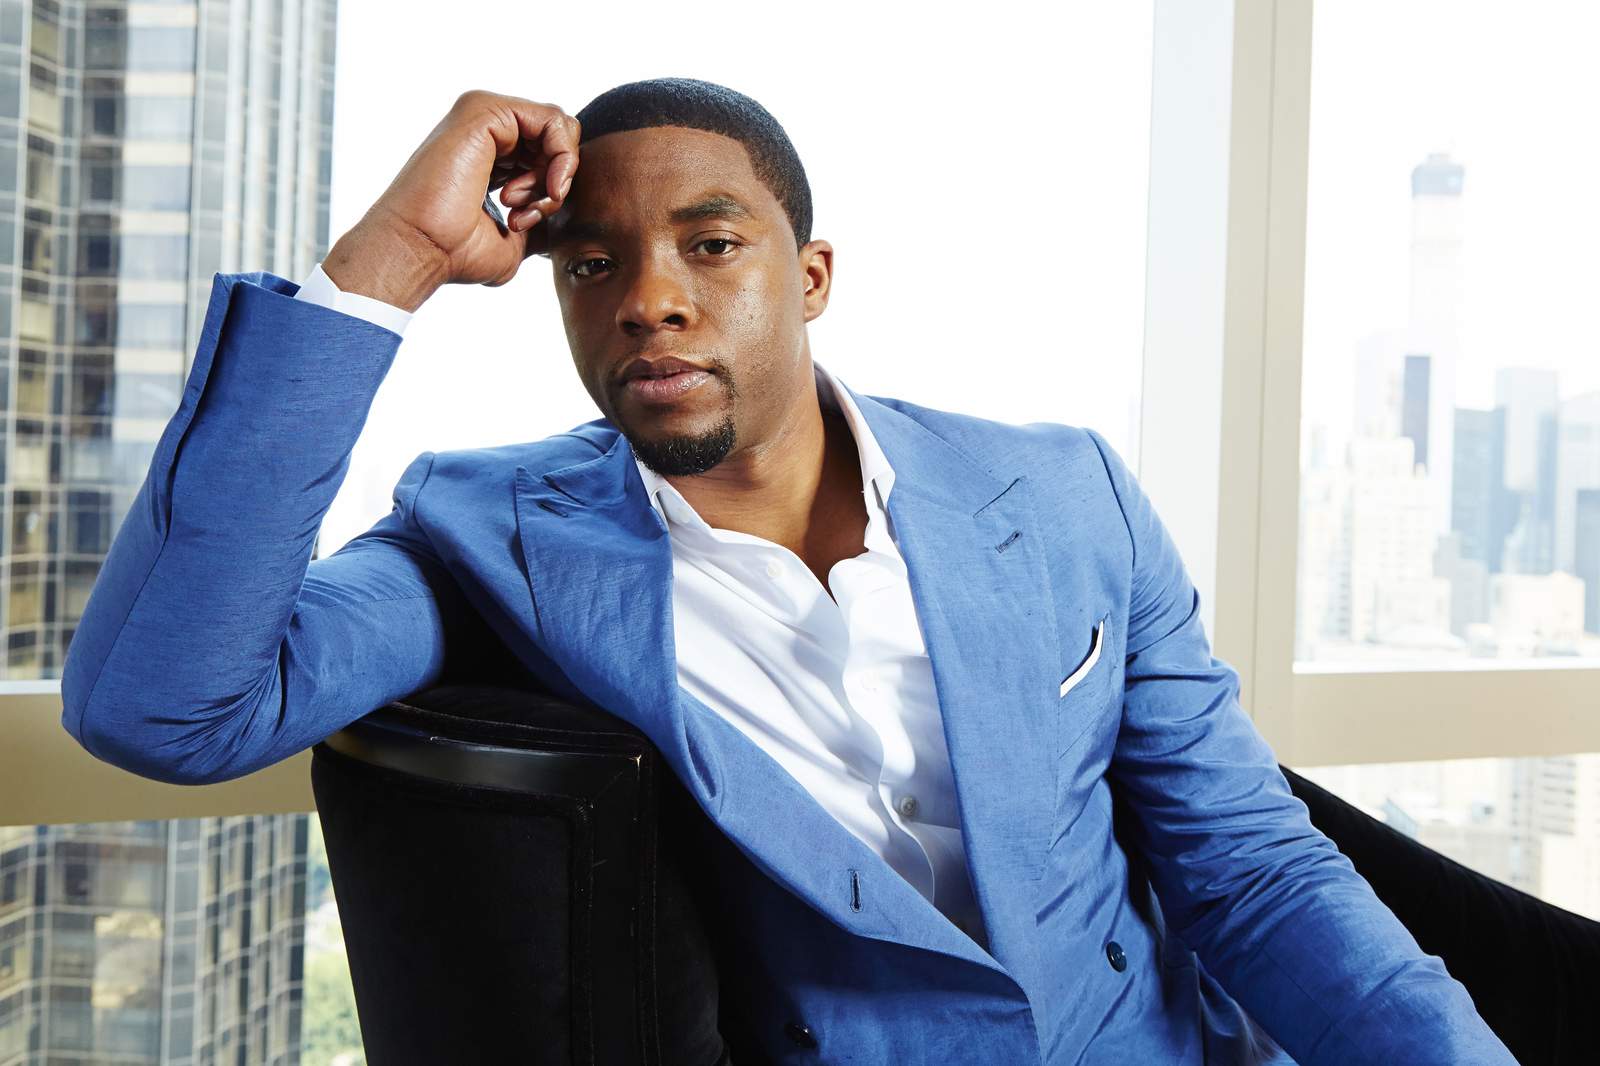 Boseman to be honored in hometown, where he inspired others